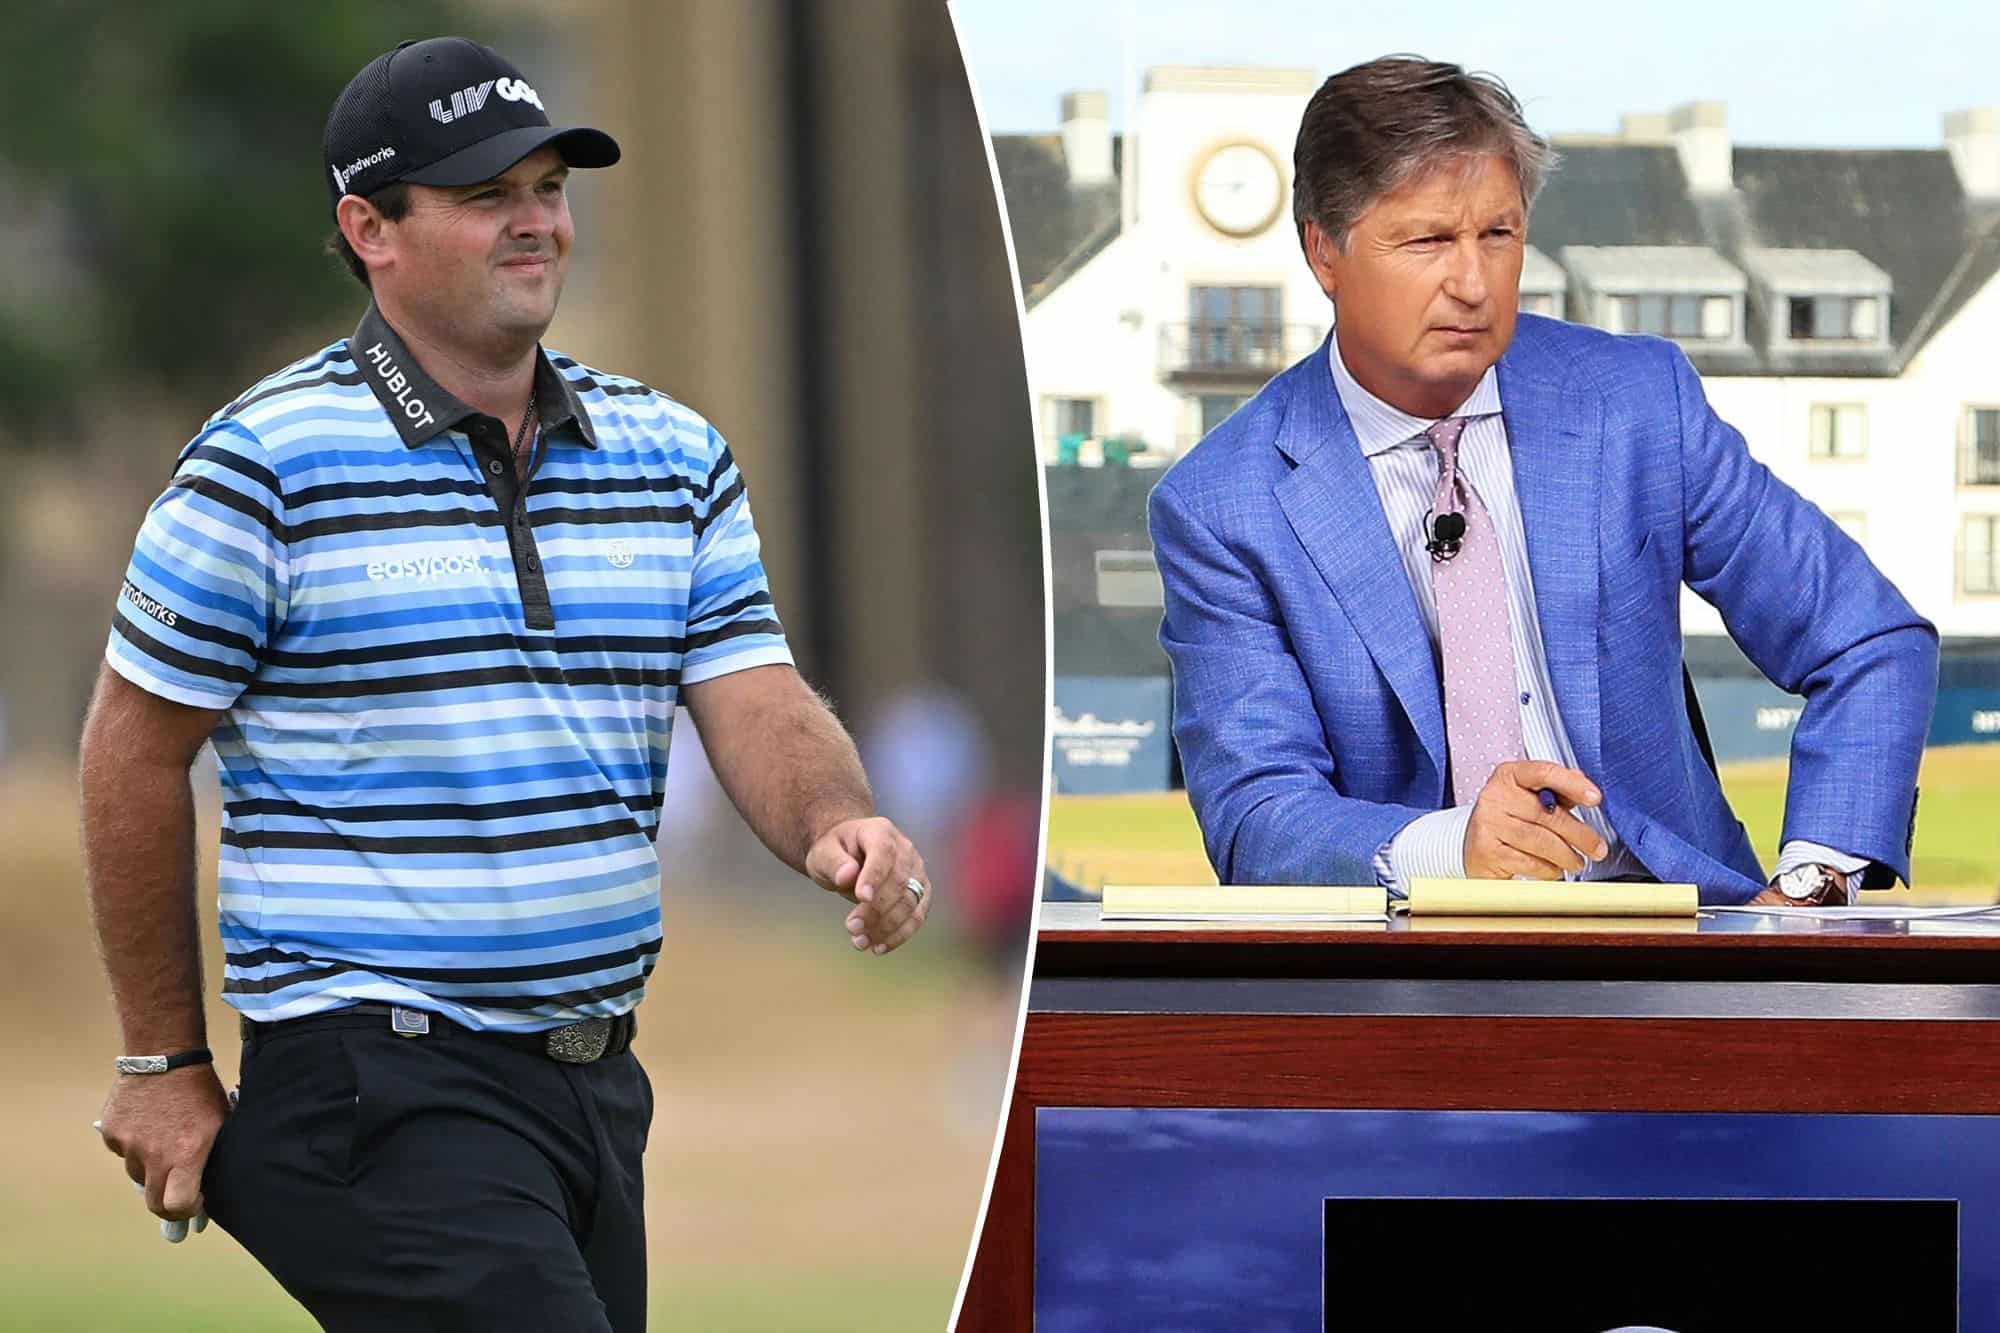 Golfer Patrick Reed and Commentator Brandel Chamblee (cc: NY post)